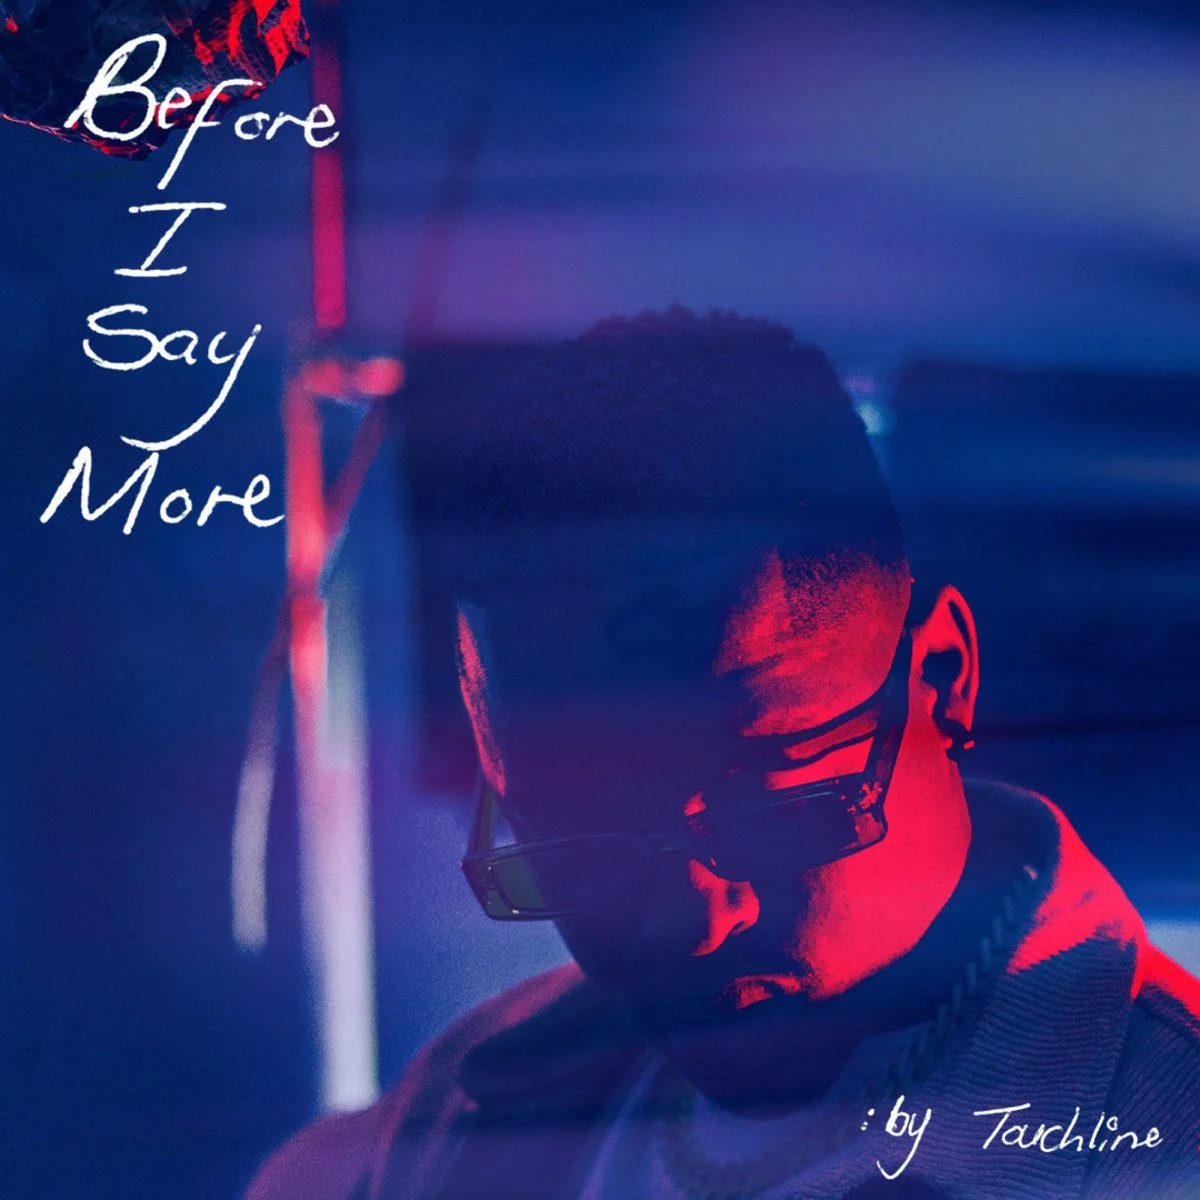 Before I Say More EP